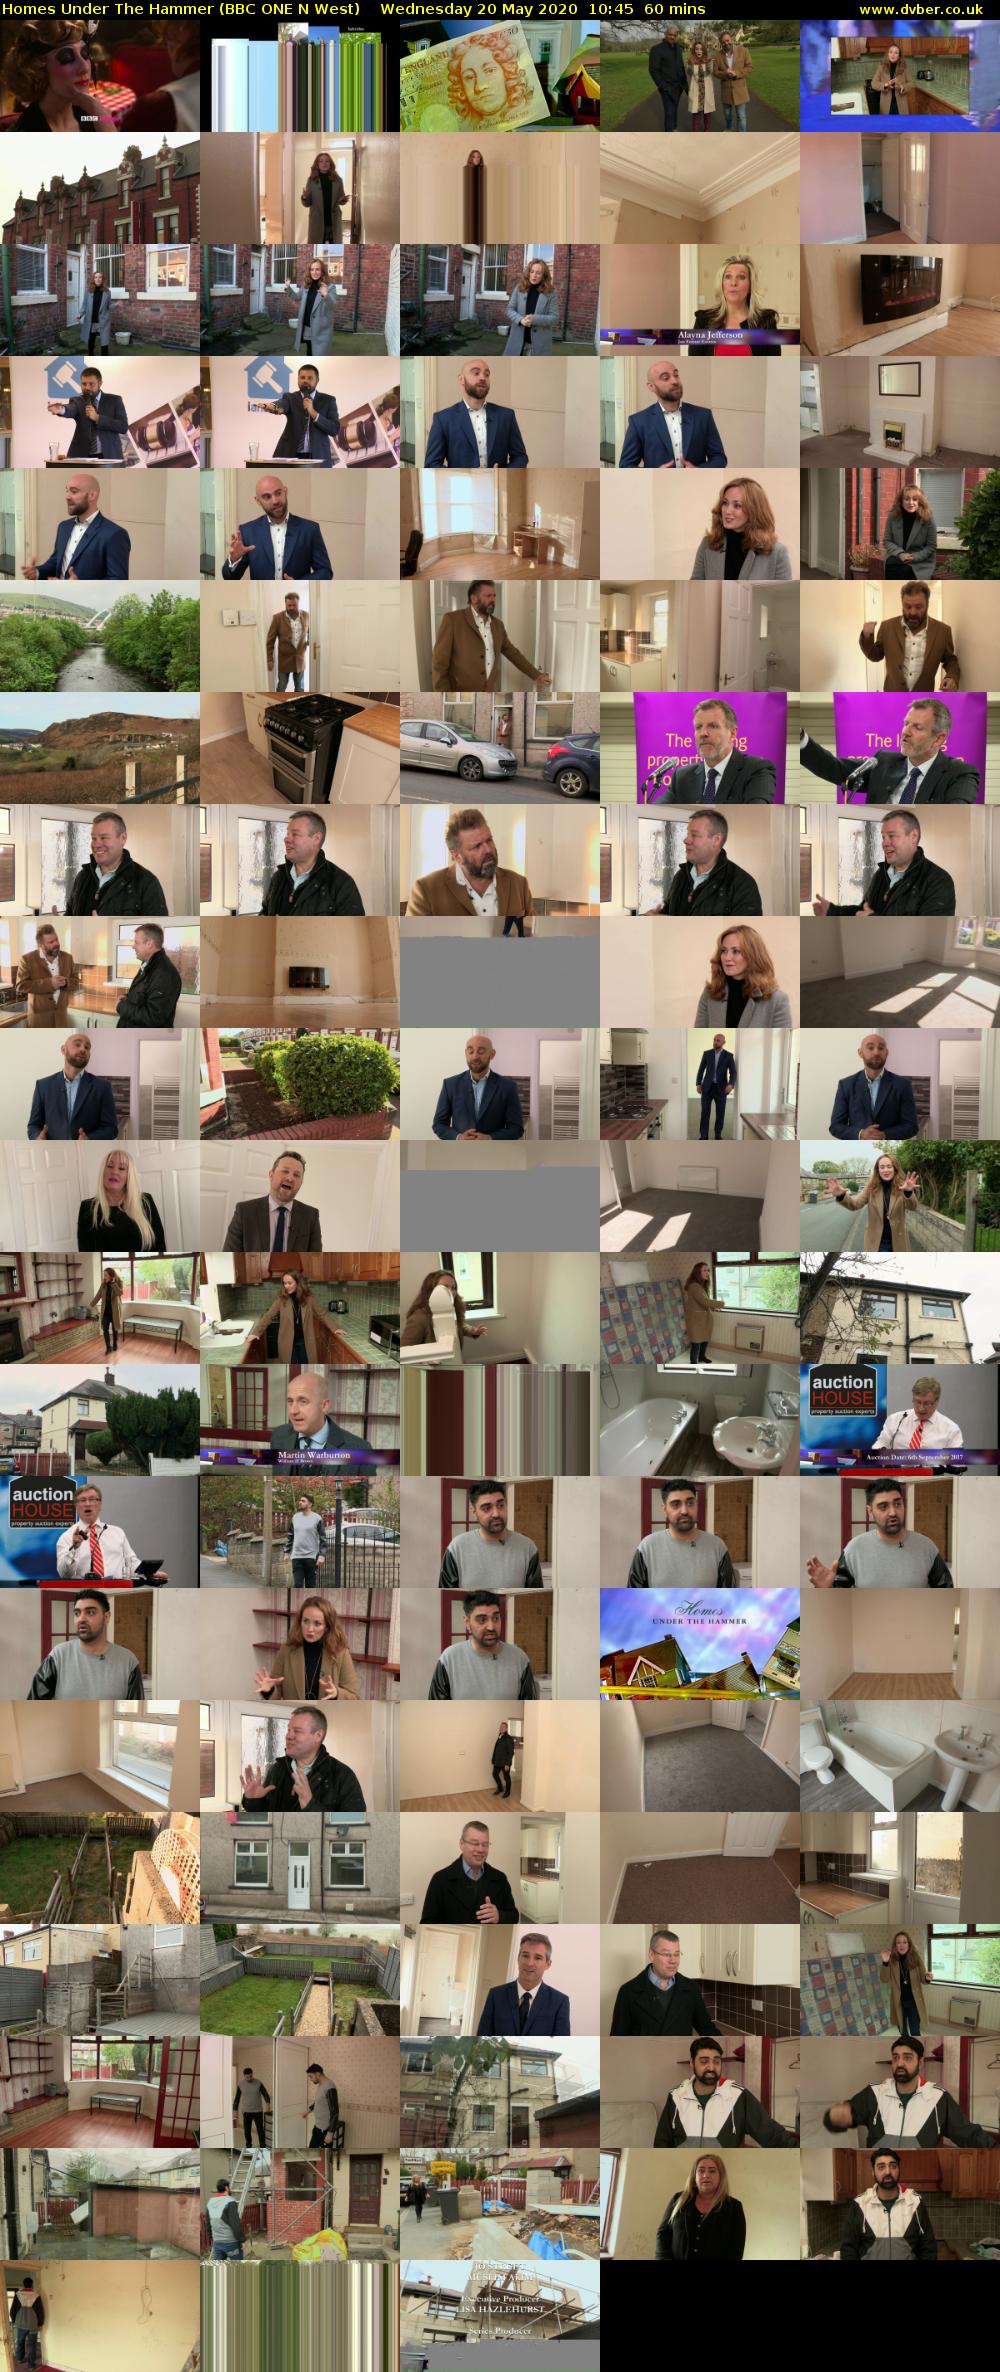 Homes Under The Hammer (BBC ONE N West) Wednesday 20 May 2020 10:45 - 11:45